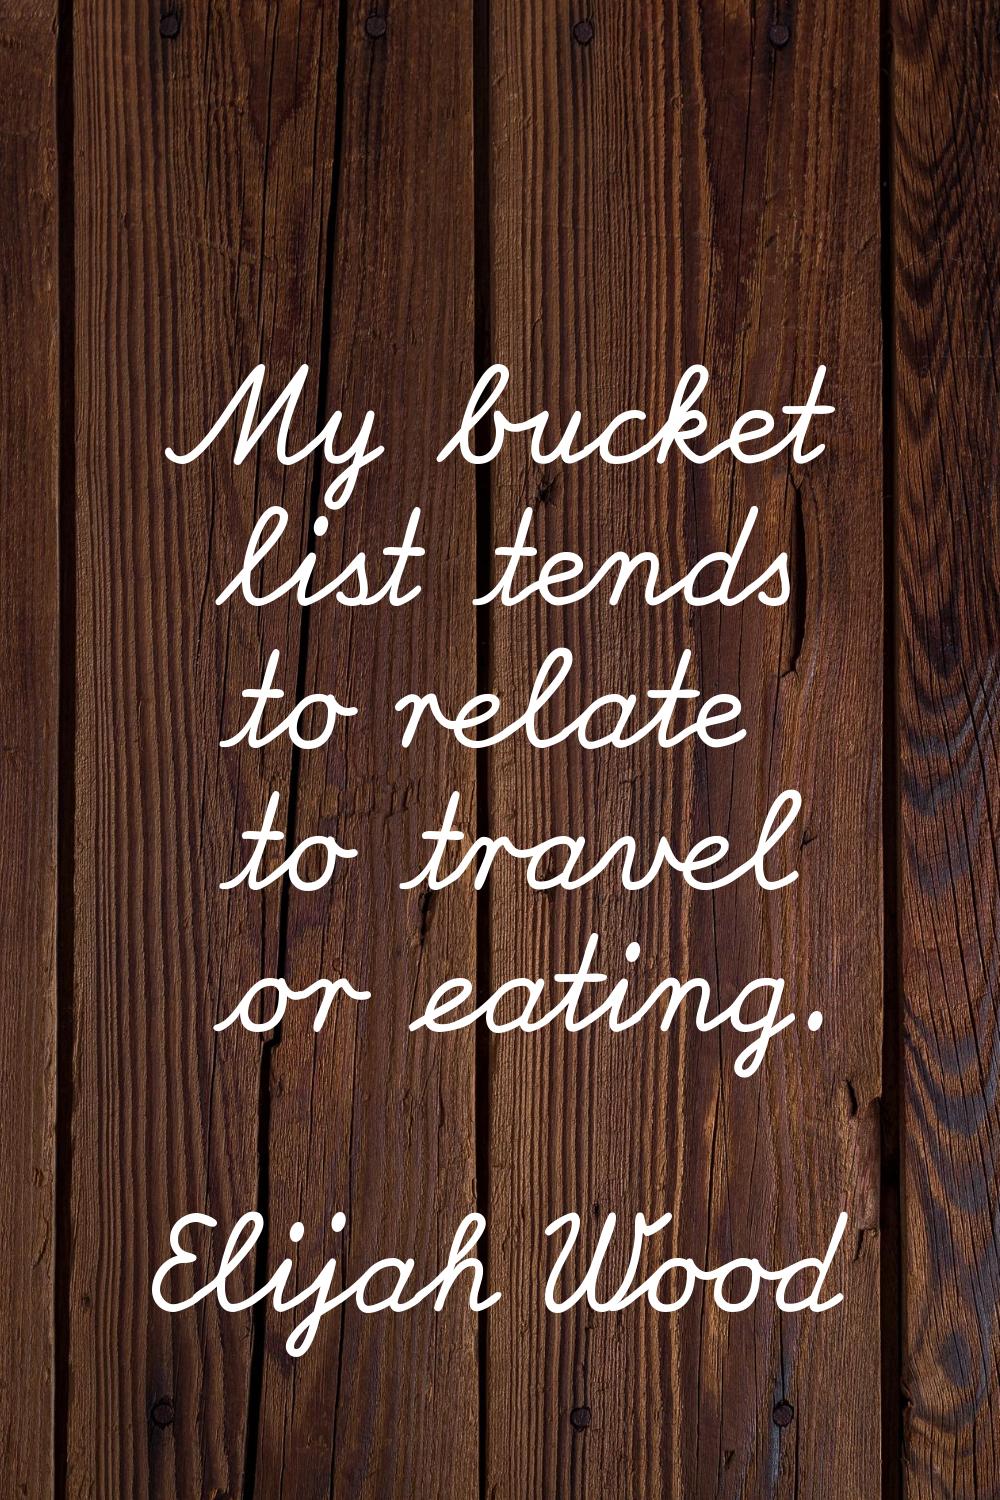 My bucket list tends to relate to travel or eating.